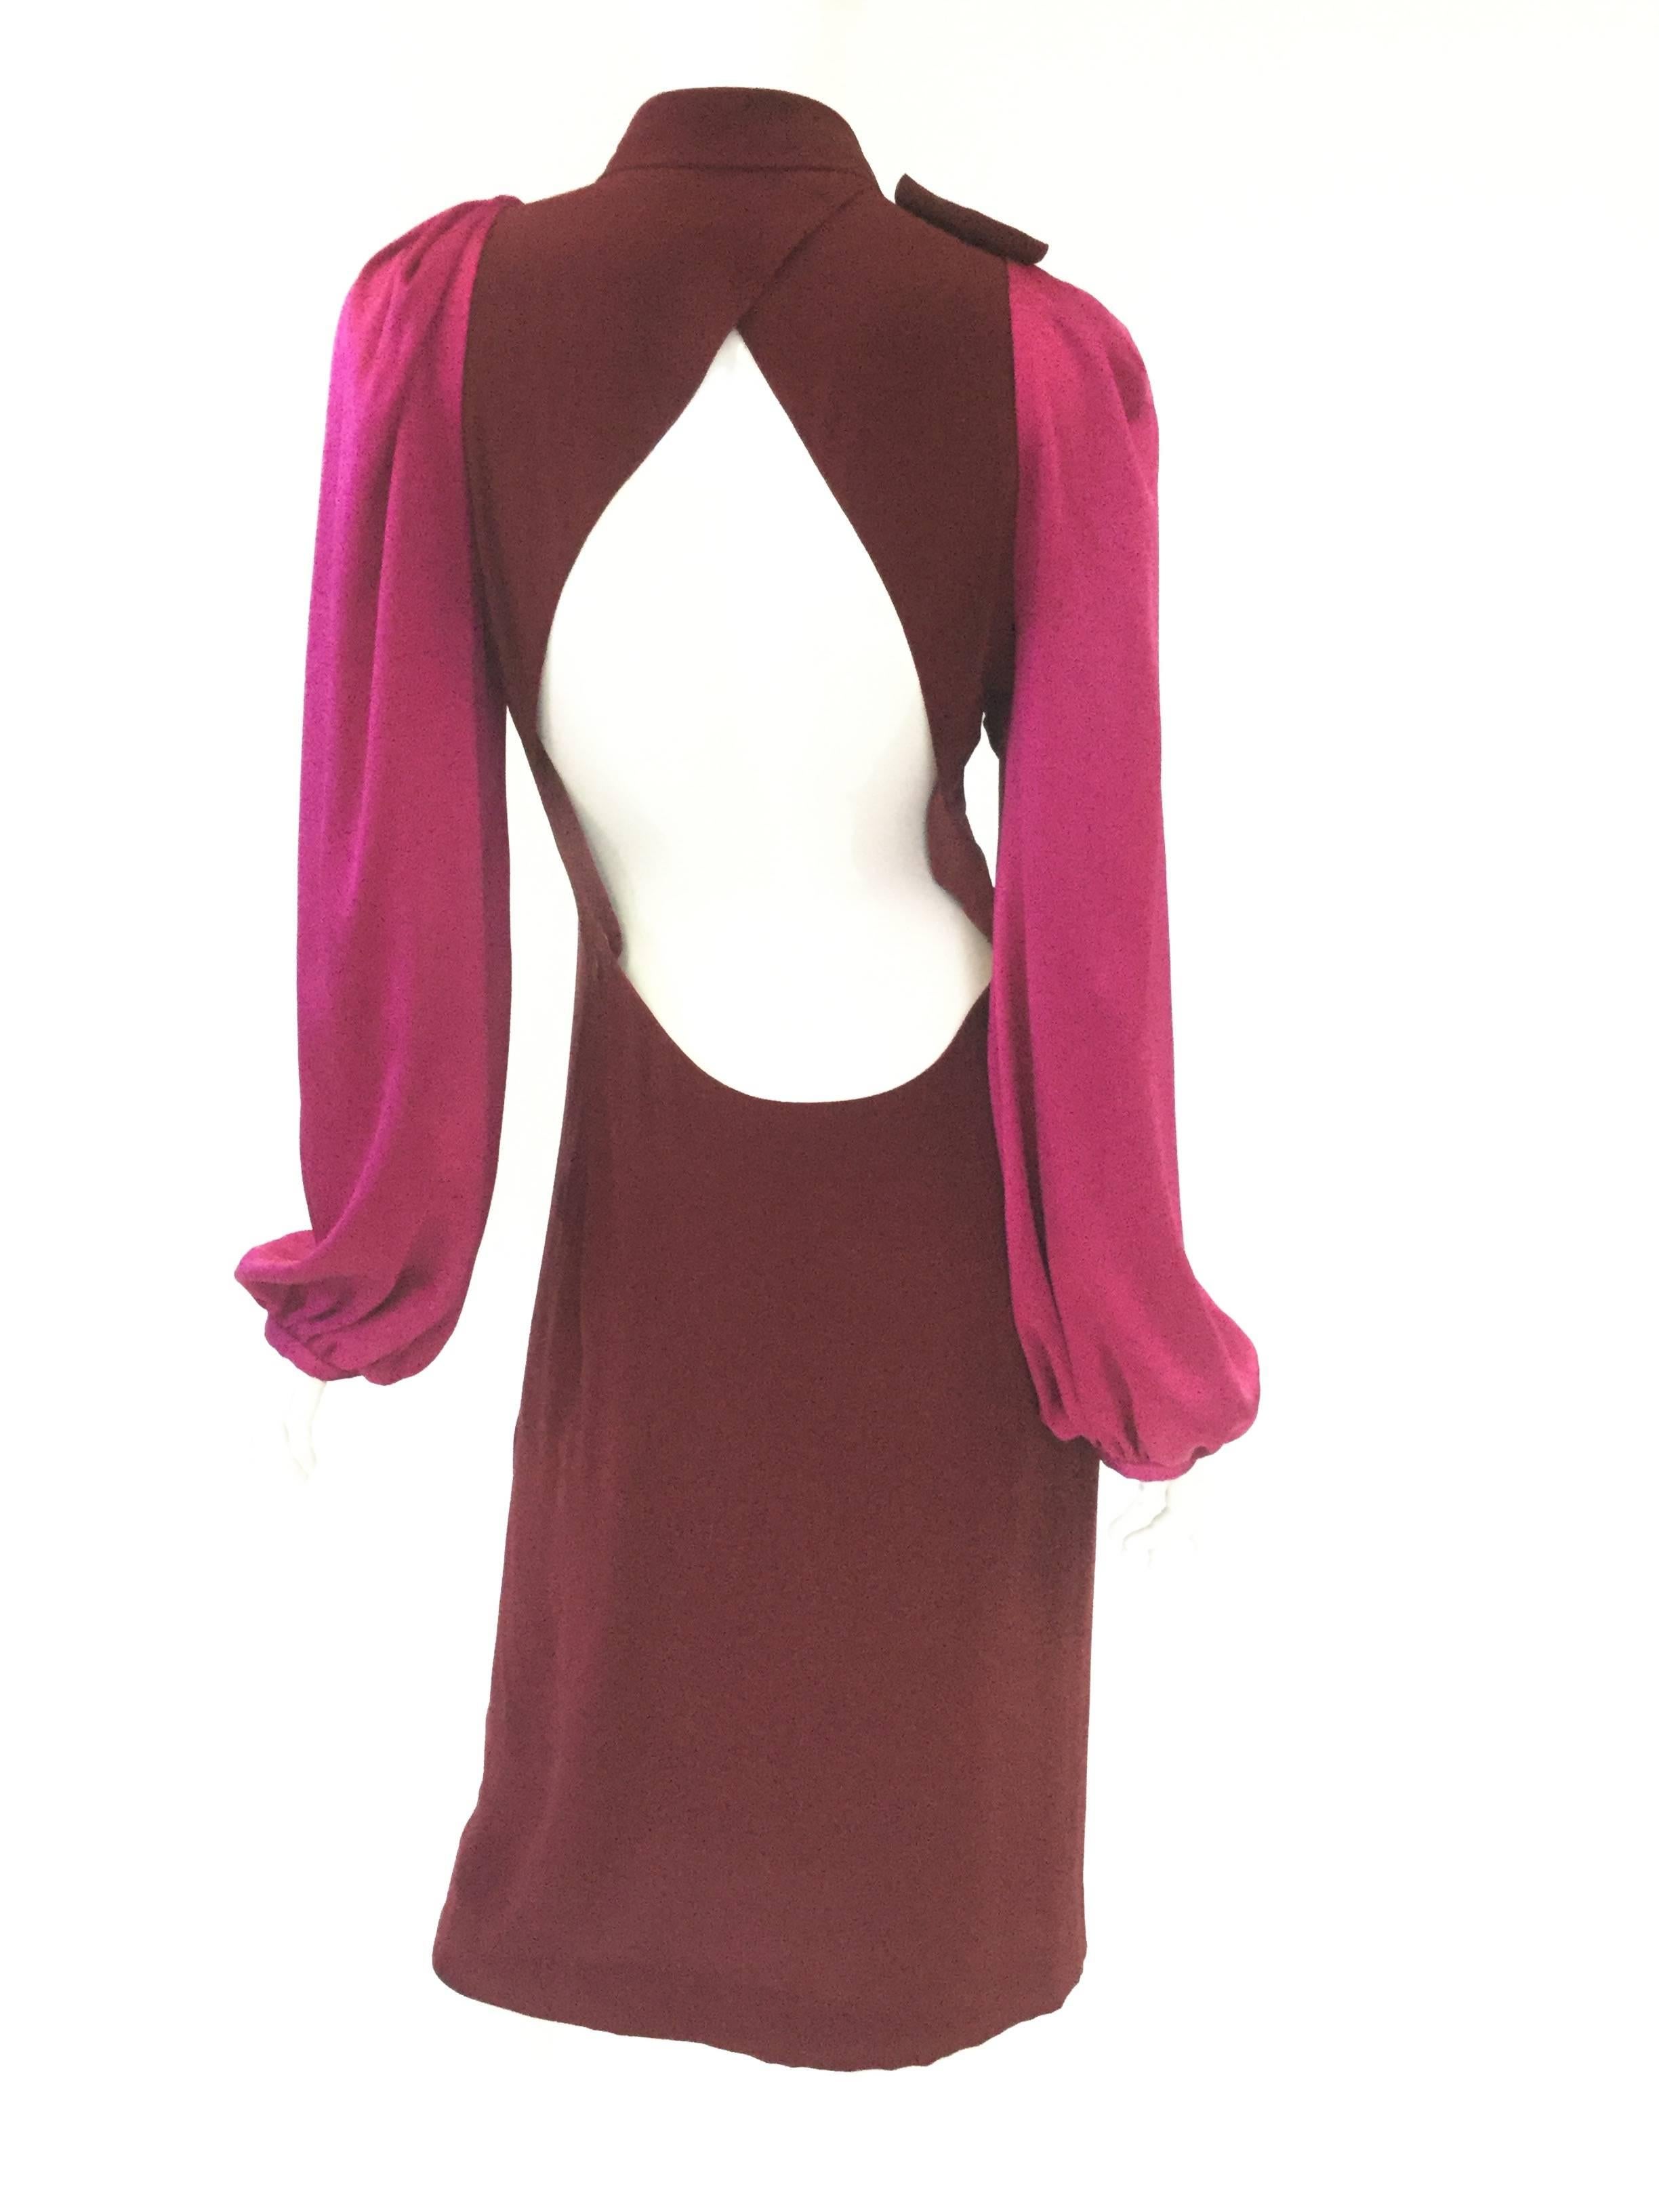 Stunning cerise and maroon dress by Sonia Rykiel! The dress is primarily a red-brown maroon with billowing pink-fuchsia bishop sleeves. The keyhole neckline of the dress is accented by a relaxed collar bow. The teardrop-shaped scoop back is